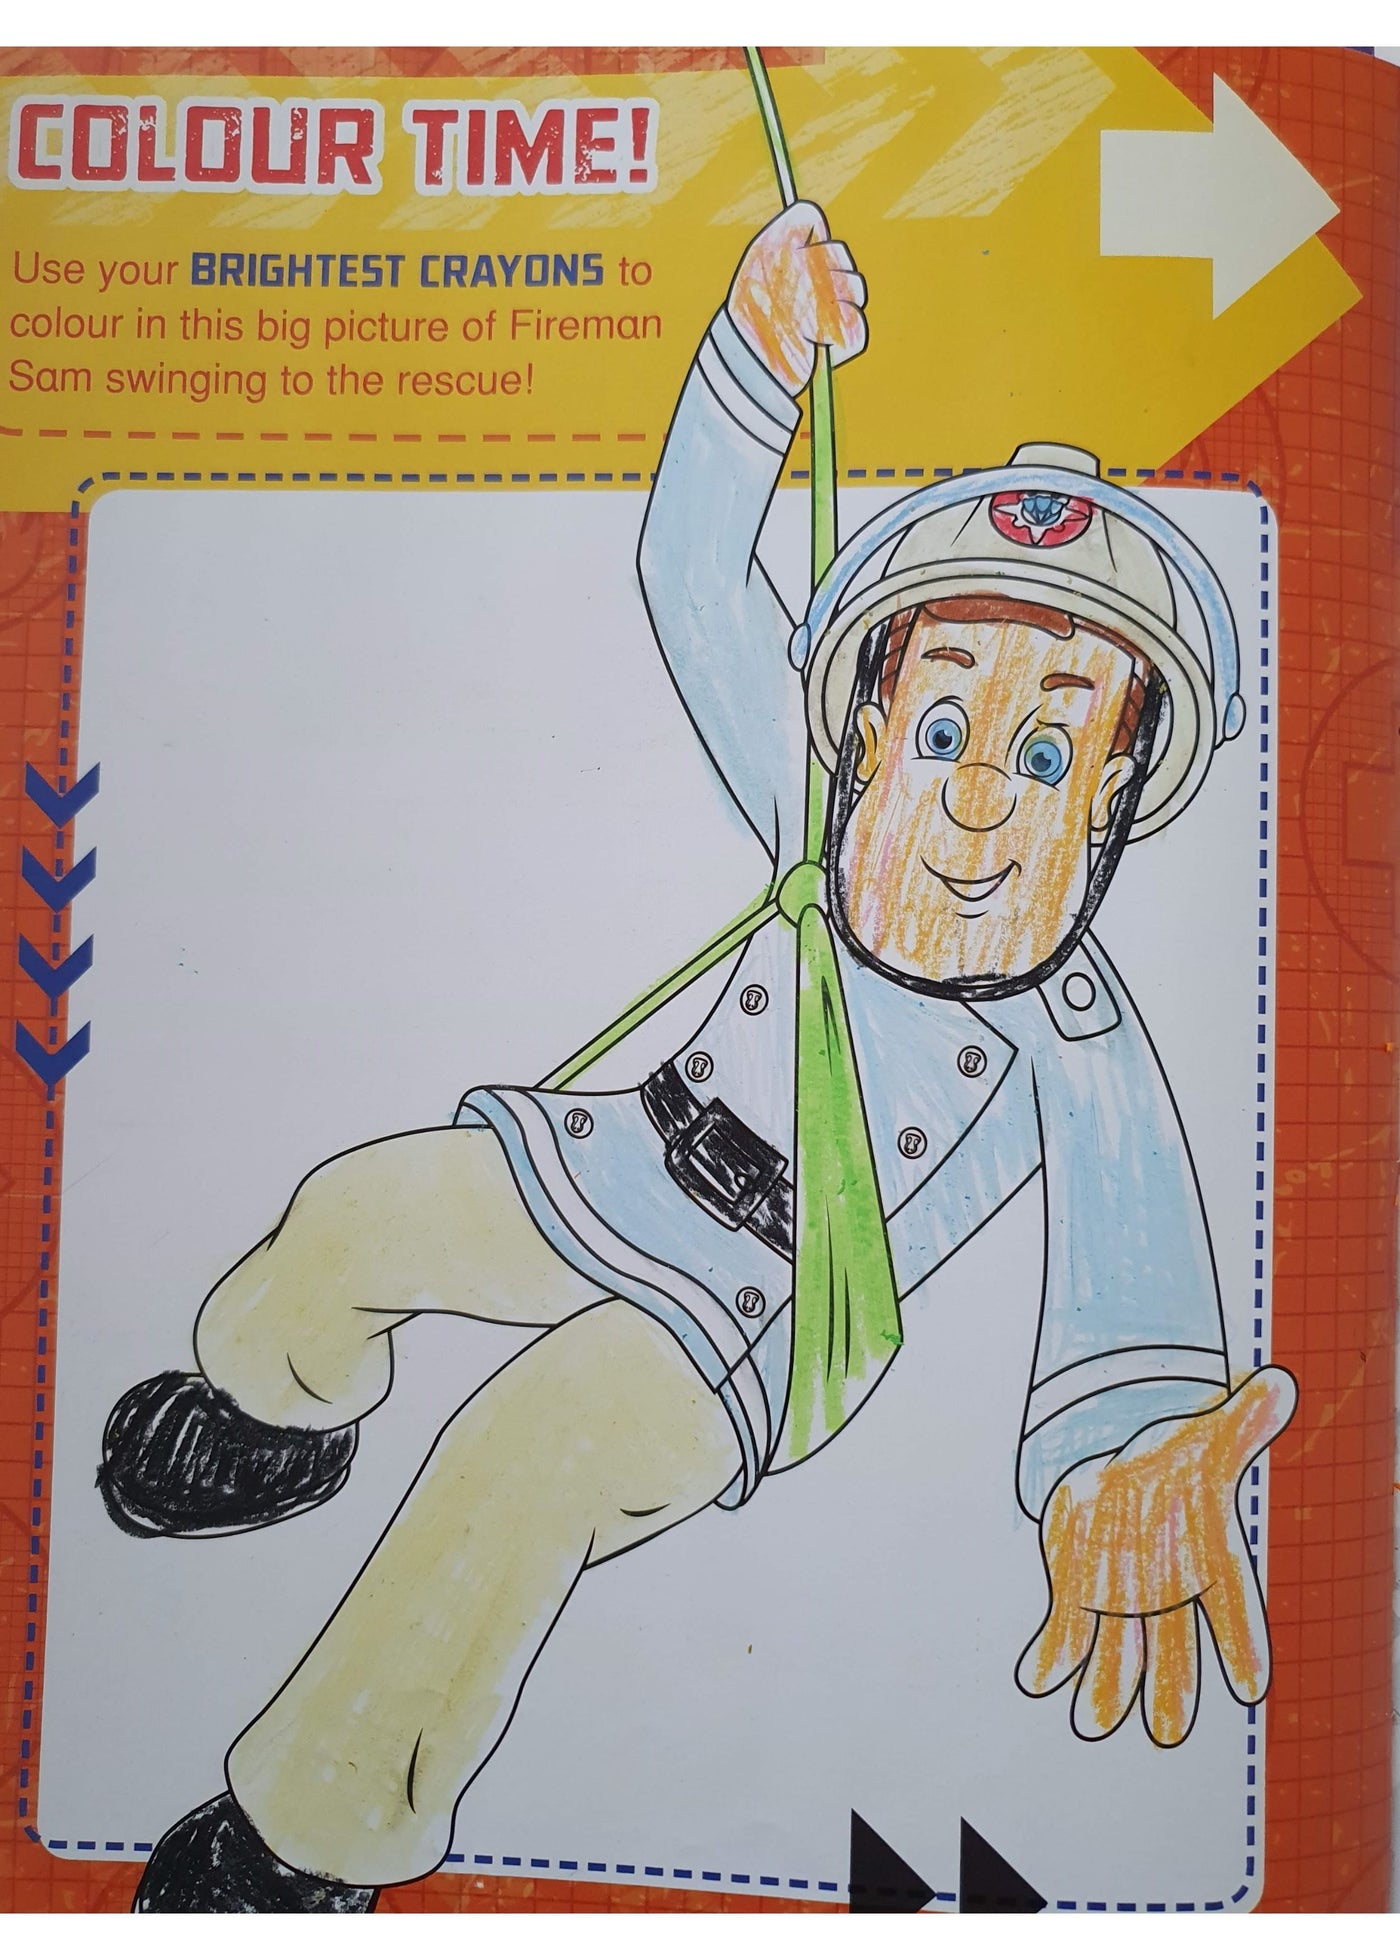 Fireman Sam Coloring Pages for Kids Printable Free Download   ColoringPages101com